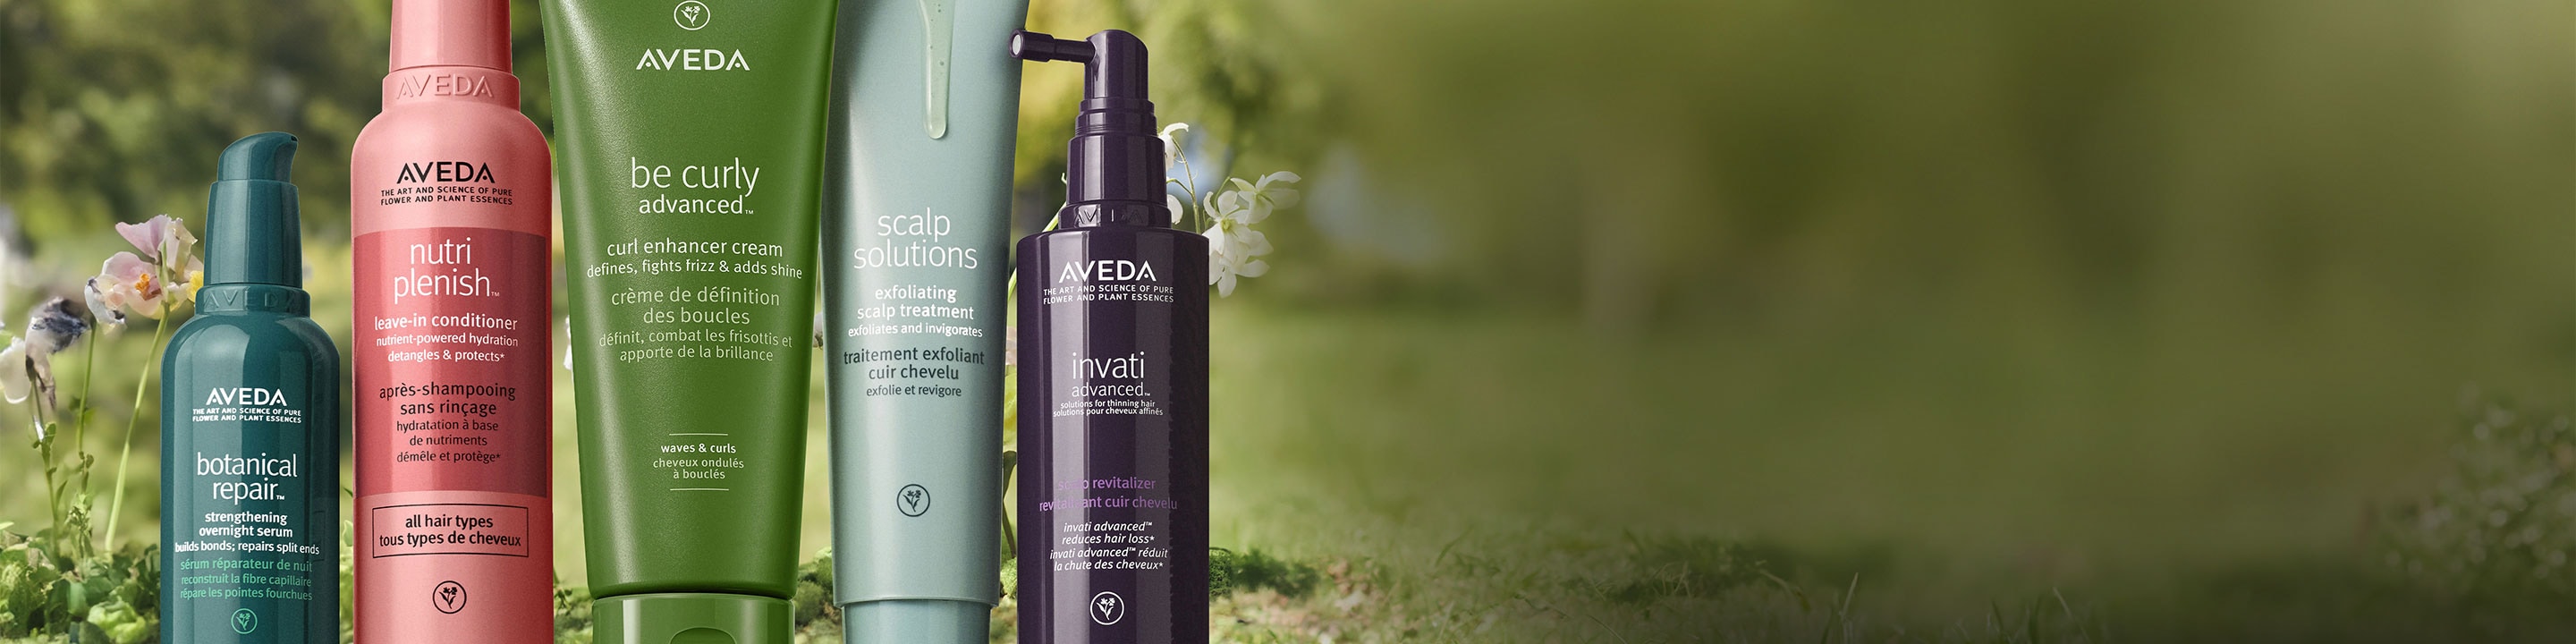 Shop Aveda Favorites with 25% off everything